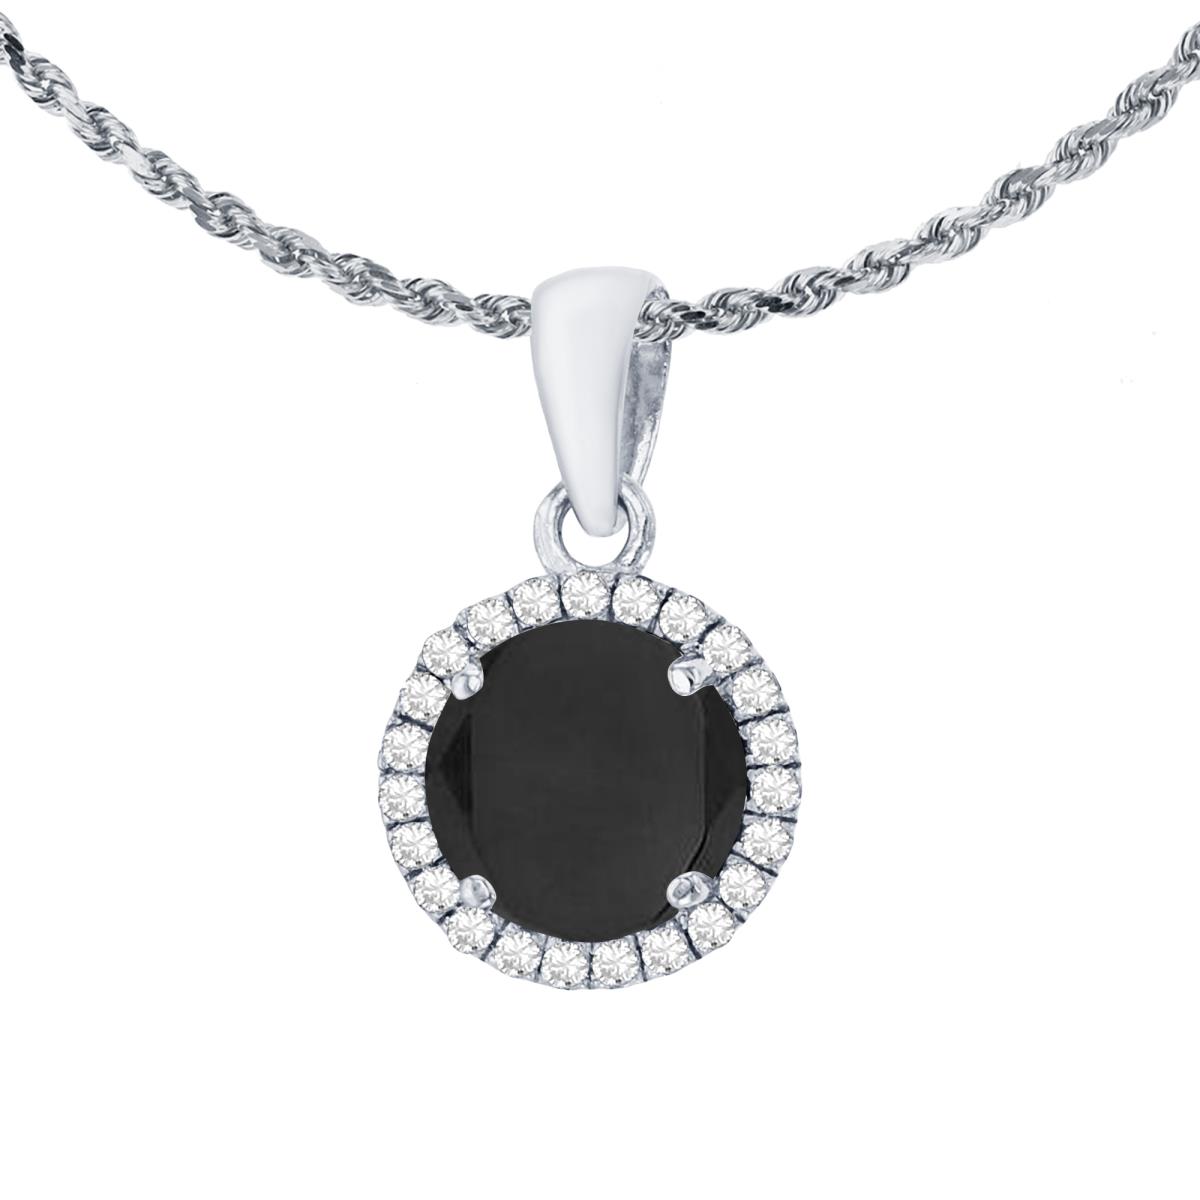 14K White Gold 7mm Round Onyx & 0.12 CTTW Diamond Halo 18" Rope Chain Necklace